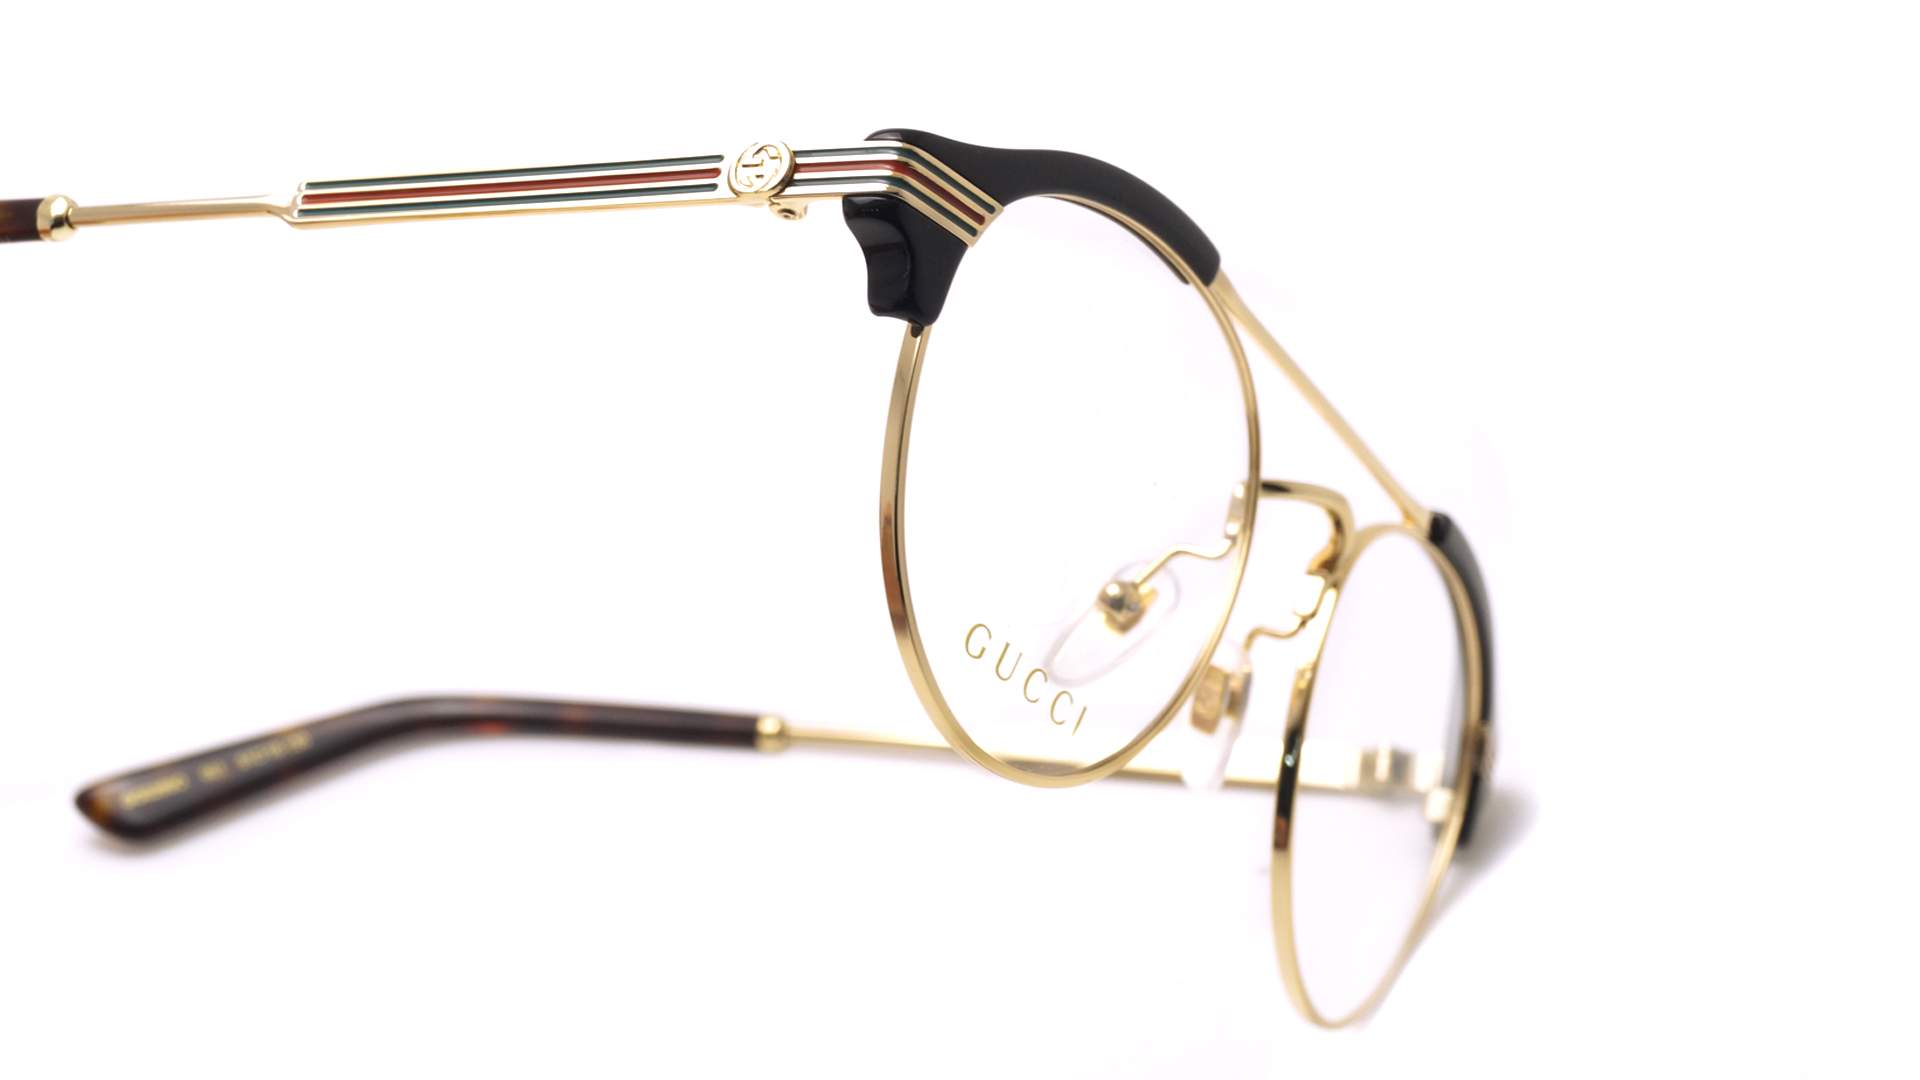 Gucci GG0289O 001 51-18 Gold in stock | Price 179,08 € Visiofactory